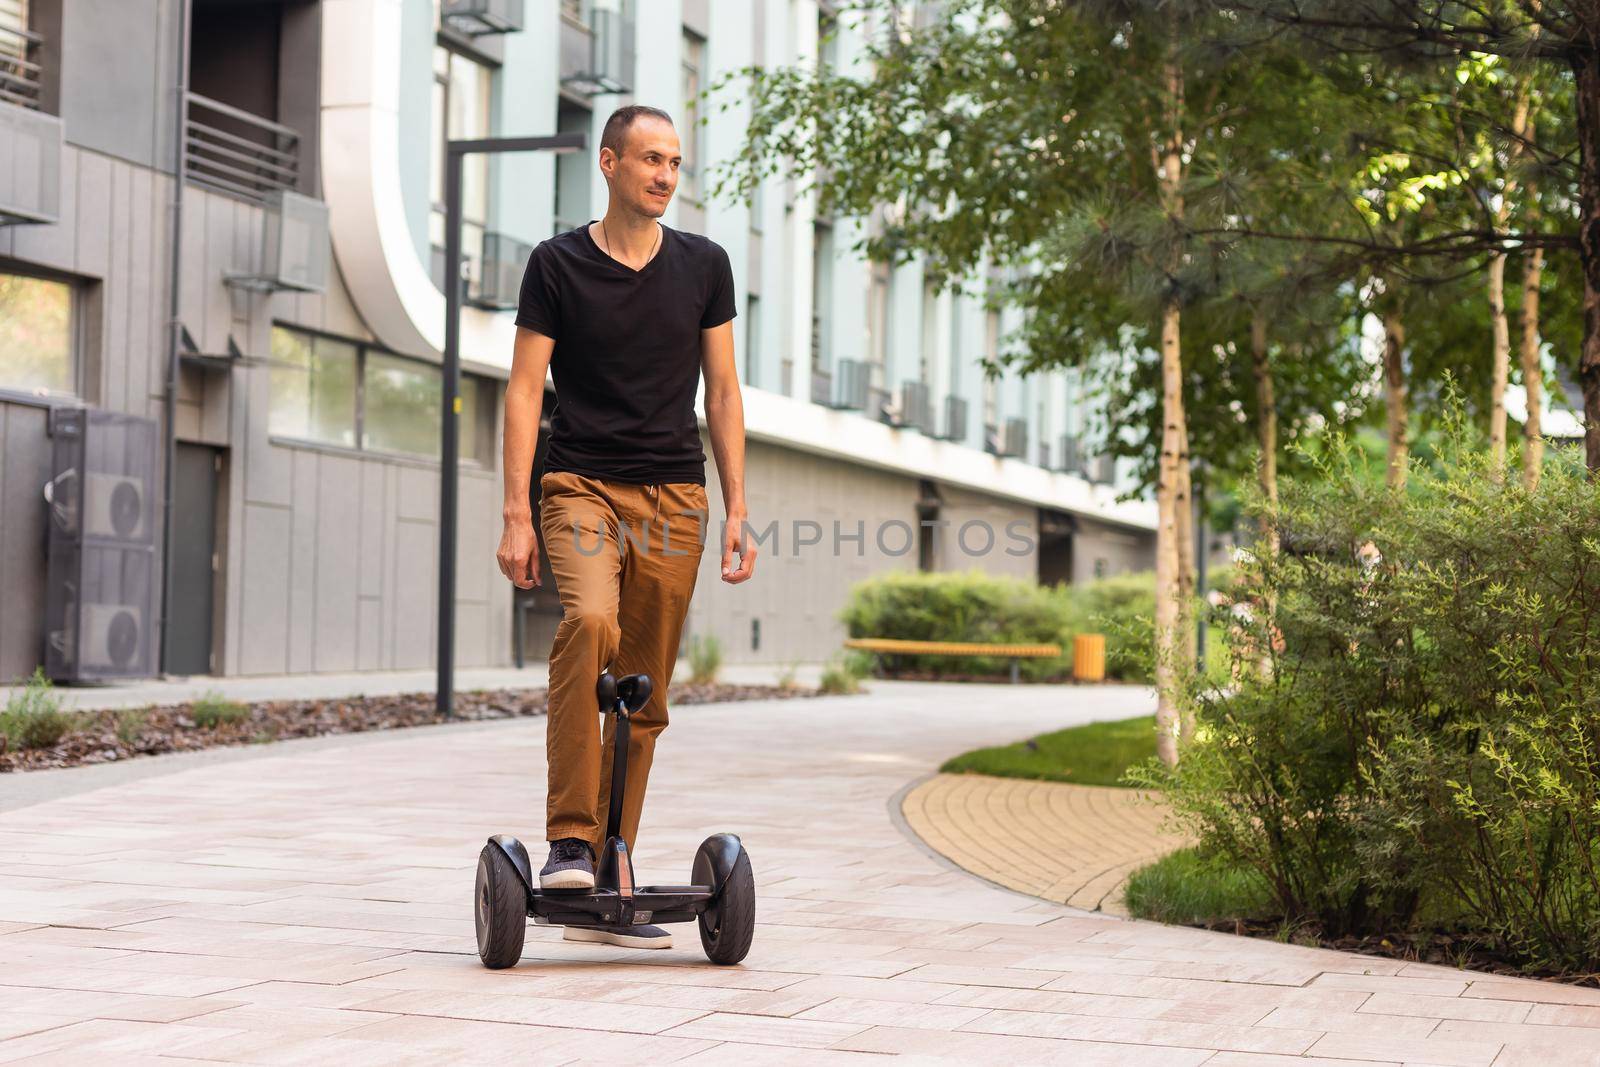 Man riding hoverboard, city. Guy on blue gyroboard.